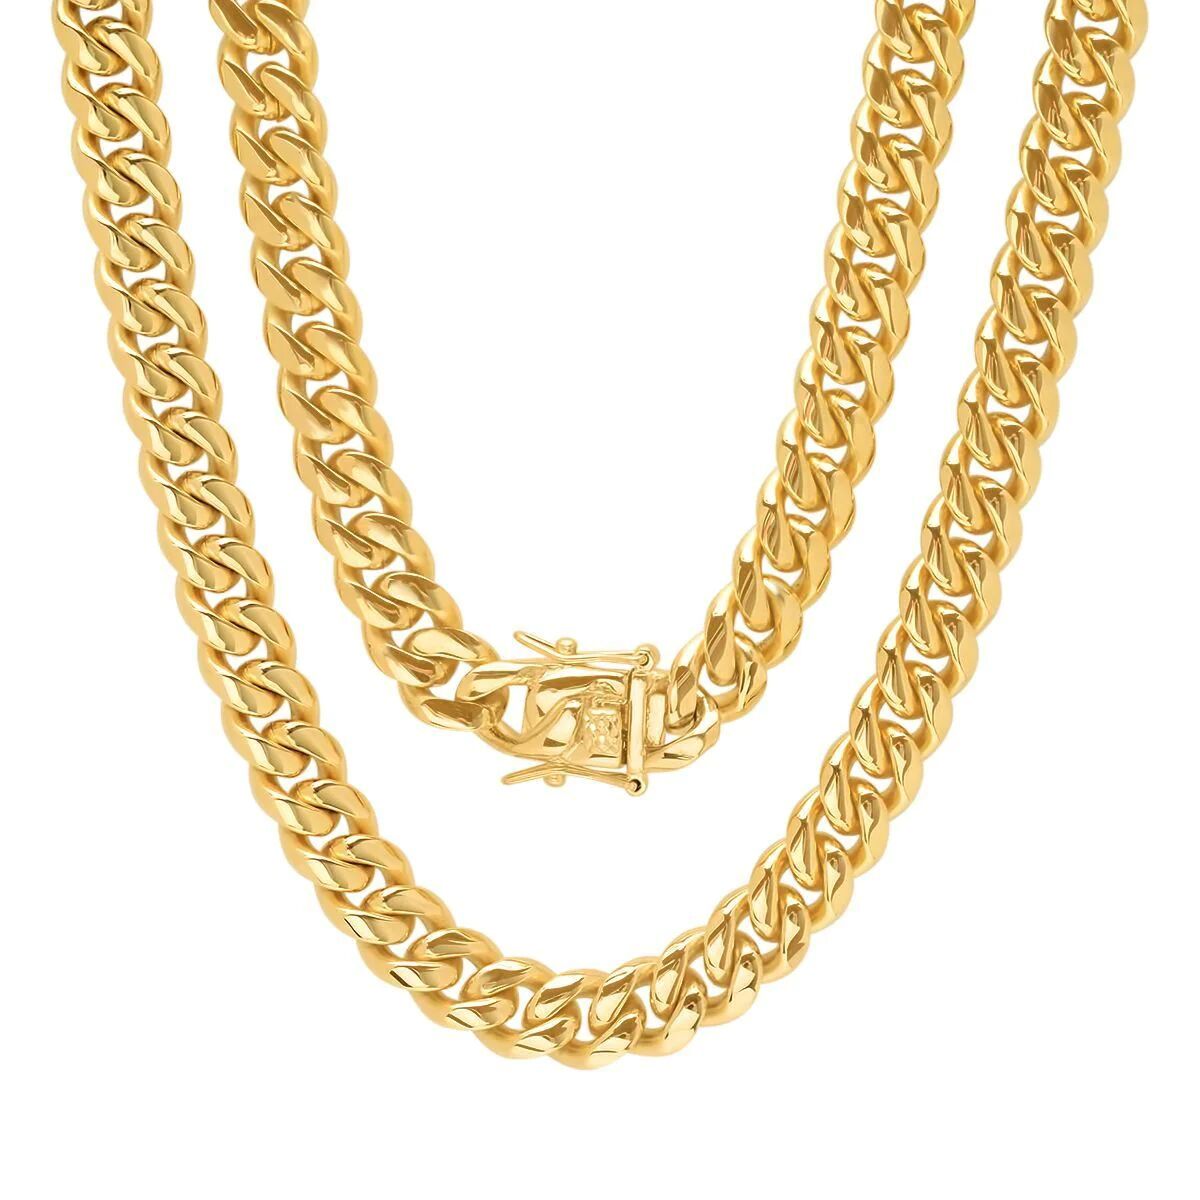 DailySale Men's 18K Gold Plated Stainless Steel 10MM Miami Cuban Chain